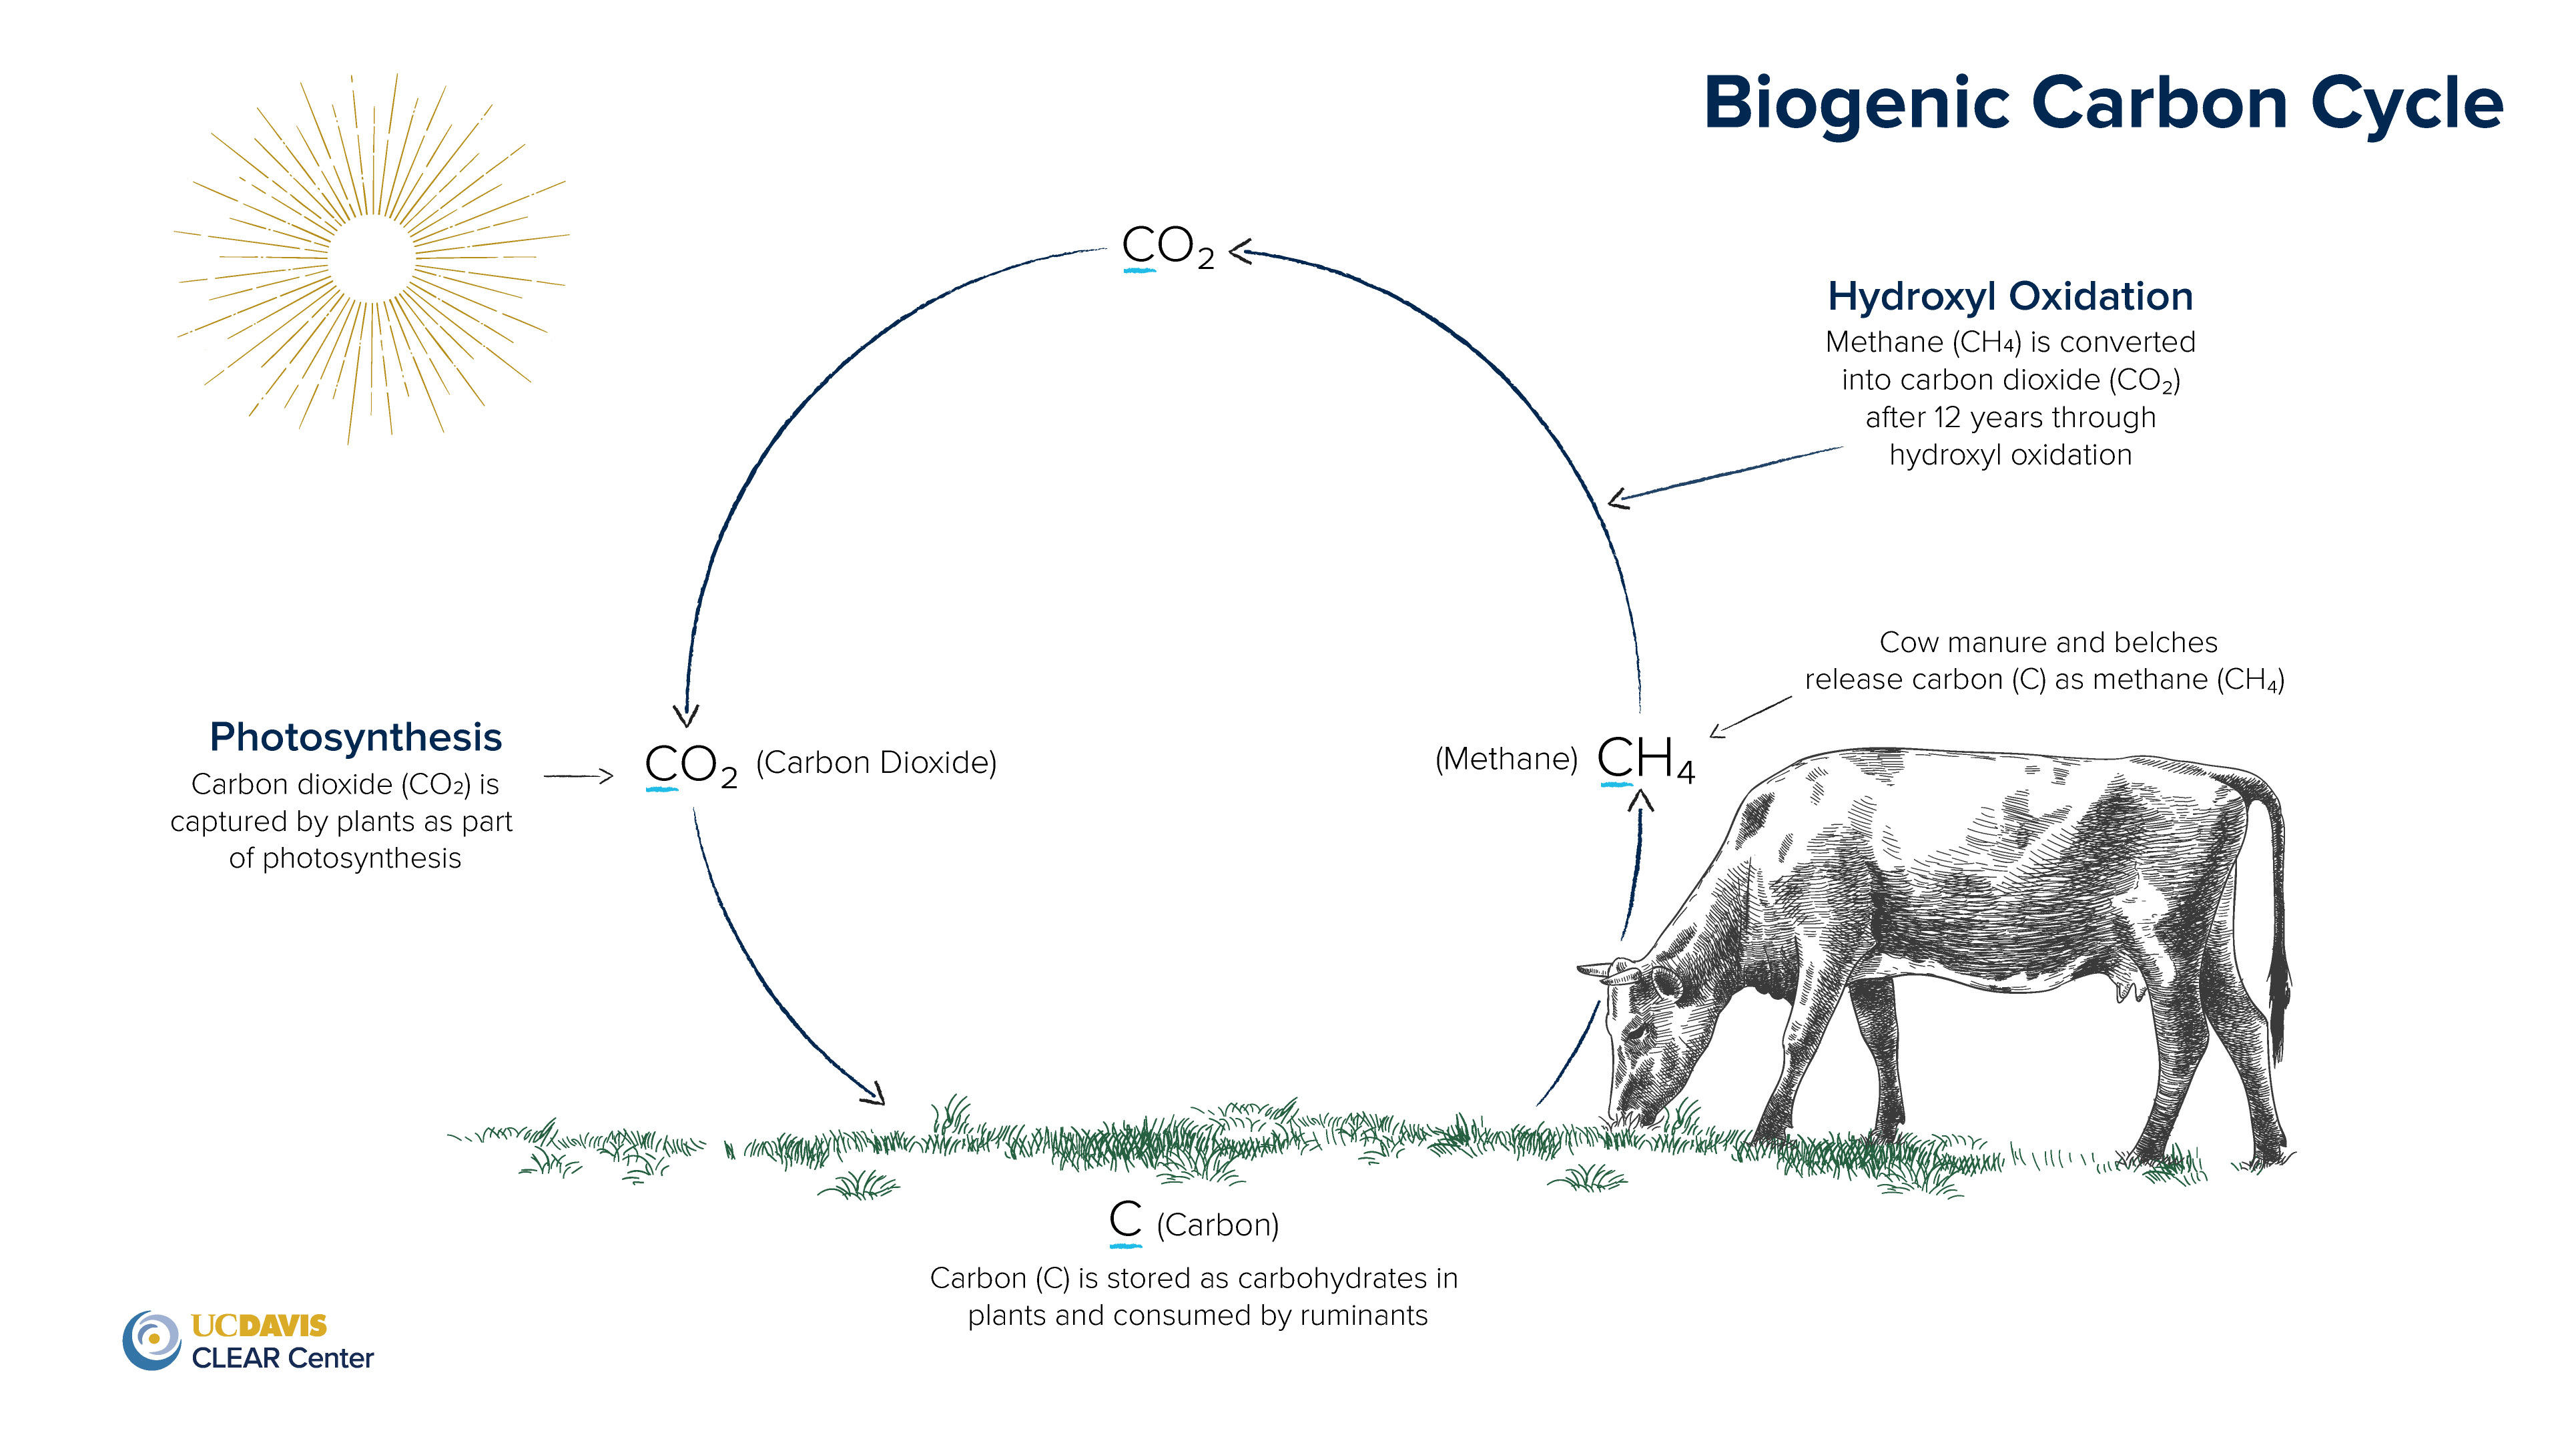 As part of the biogenic carbon cycle, plants absorb carbon dioxide, and through the process of photosynthesis, they harness the energy of the sun to produce carbohydrates such as cellulose. Cattle eat cellulose and take the carbon that makes up the cellulose and emit a portion as methane, which is CH4. After about 12 years, the methane is converted into carbon dioxide through hydroxyl oxidation. Then, the cycle begins again.